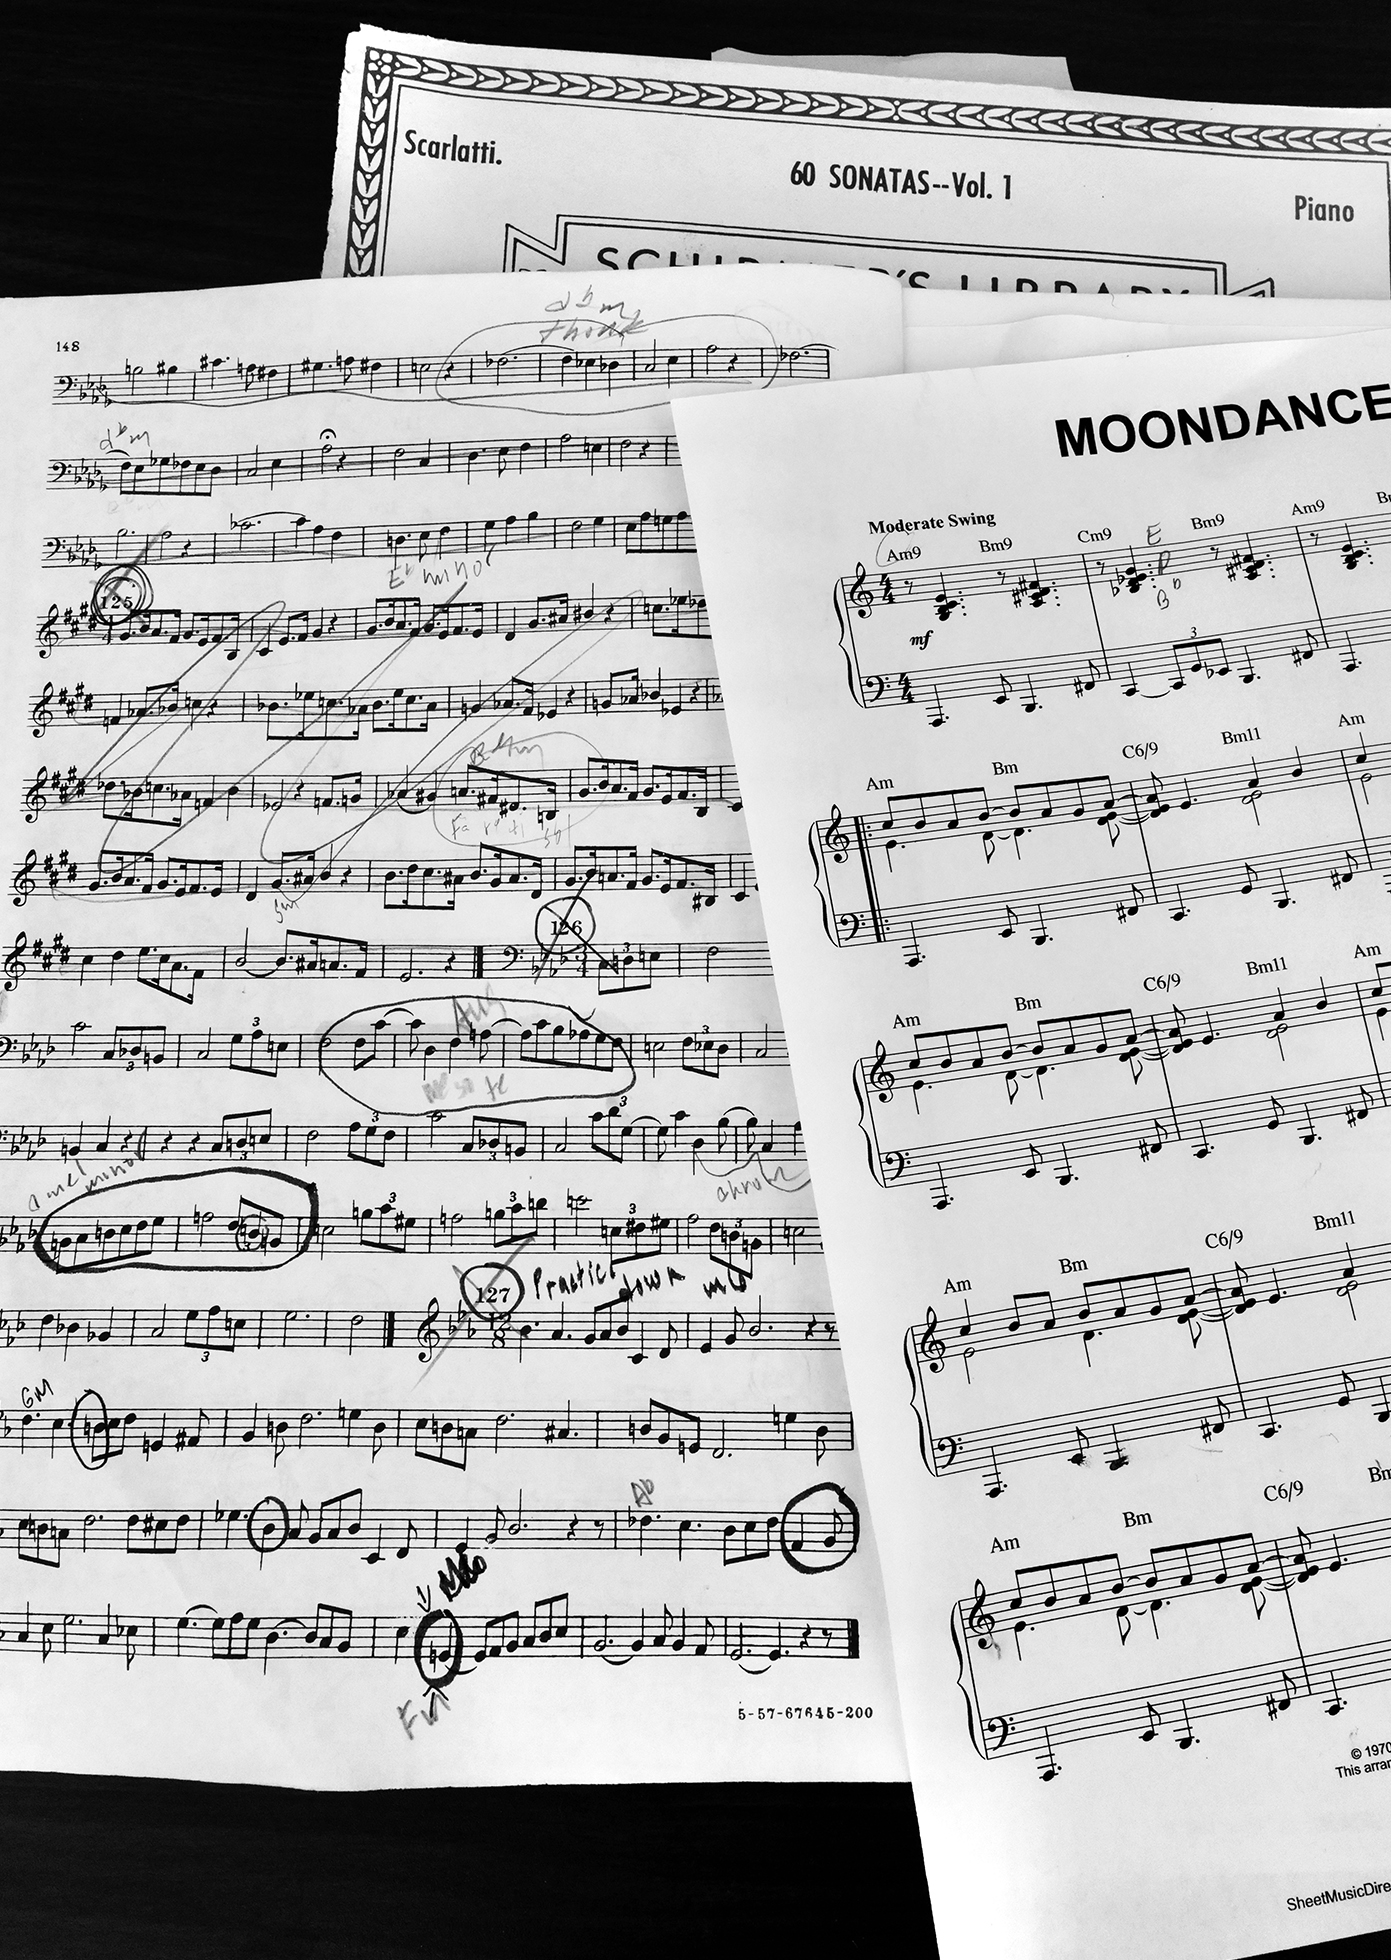 Pages of sheet music with handwritten notations. The top page says “Moondance” and the bottom page says “Scarlatti. 60 Sonatas—Vol. 1. Piano.”